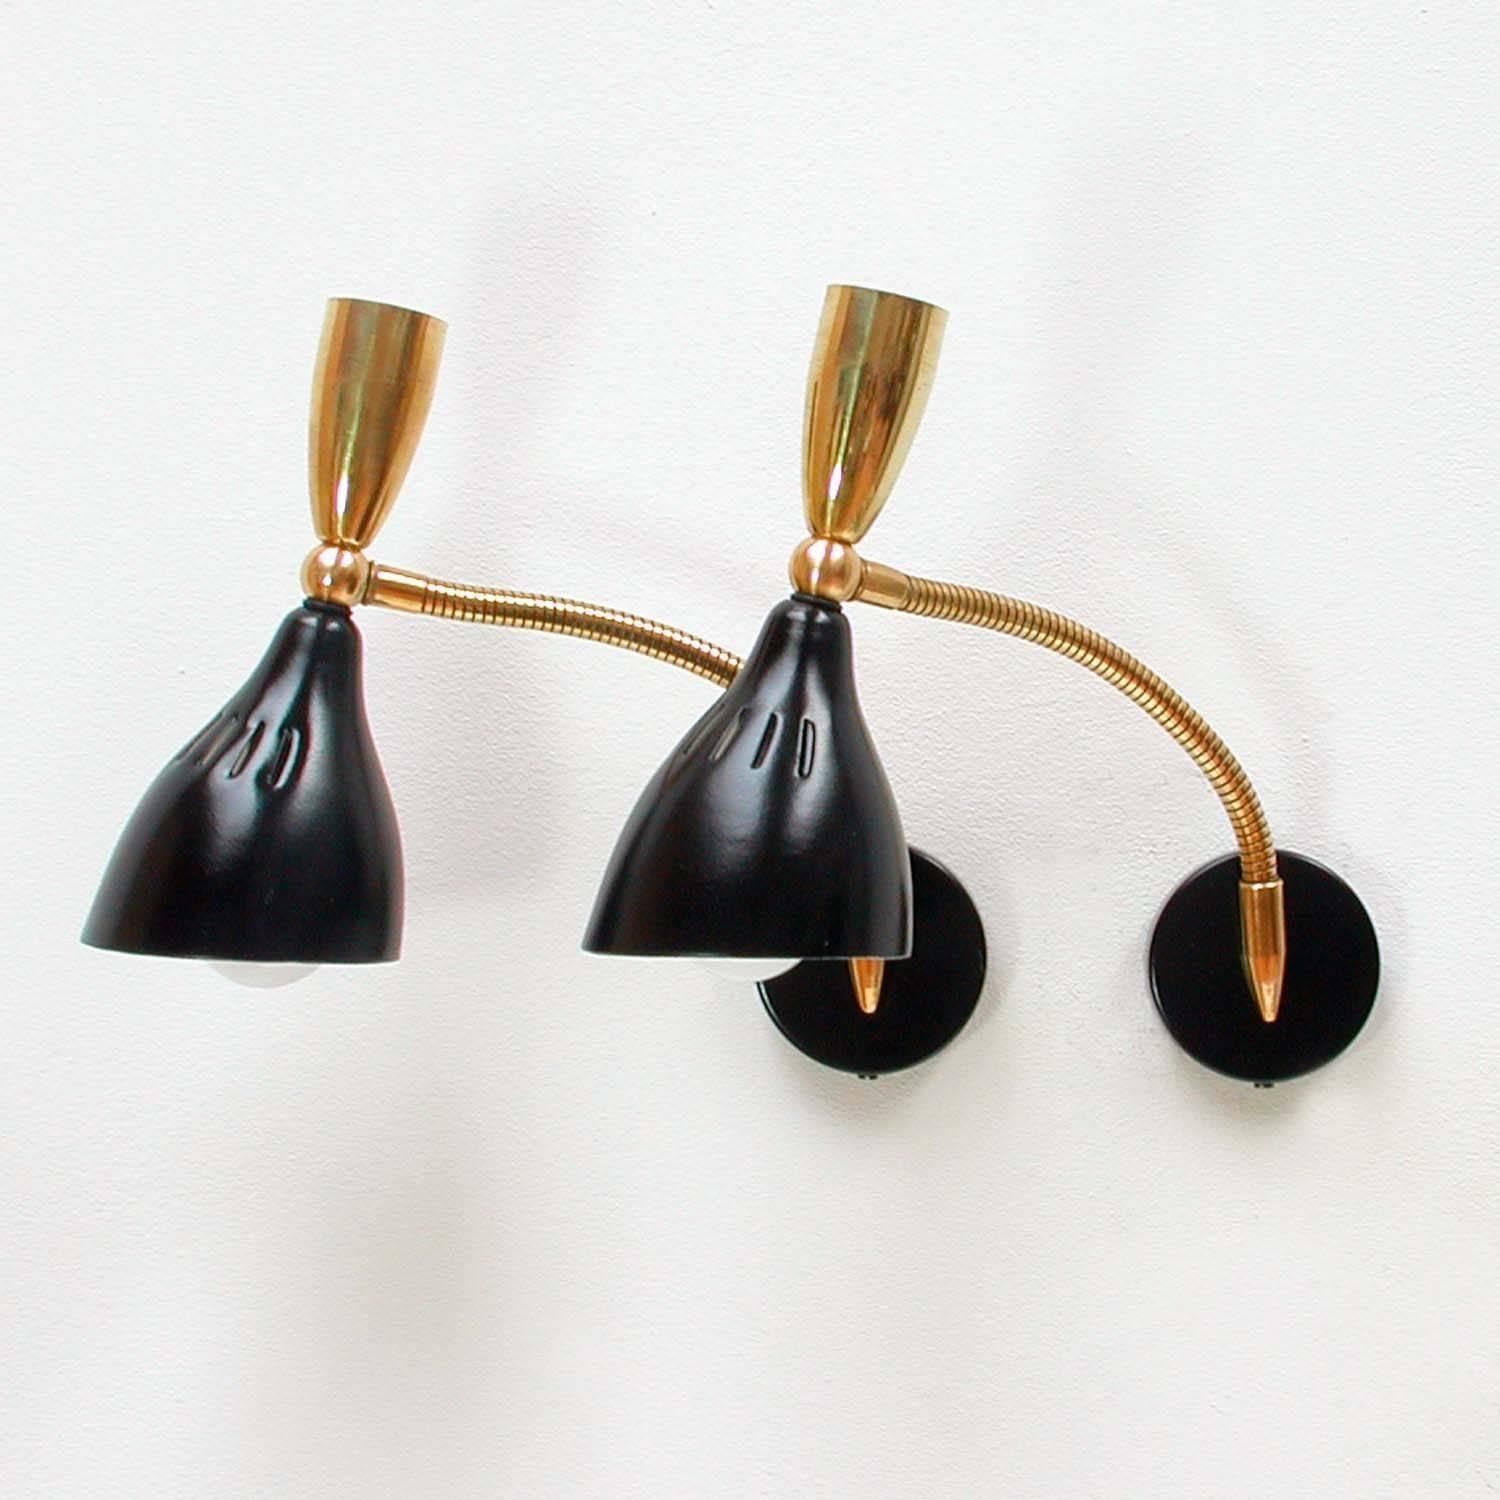 These pretty wall lights were designed and manufactured in Italy in the 1950s.
They are made of black lacquered metal and brass and have got adjustable brass gooseneck lamp arms.
Both lamps have been rewired.
The sconces are in excellent vintage